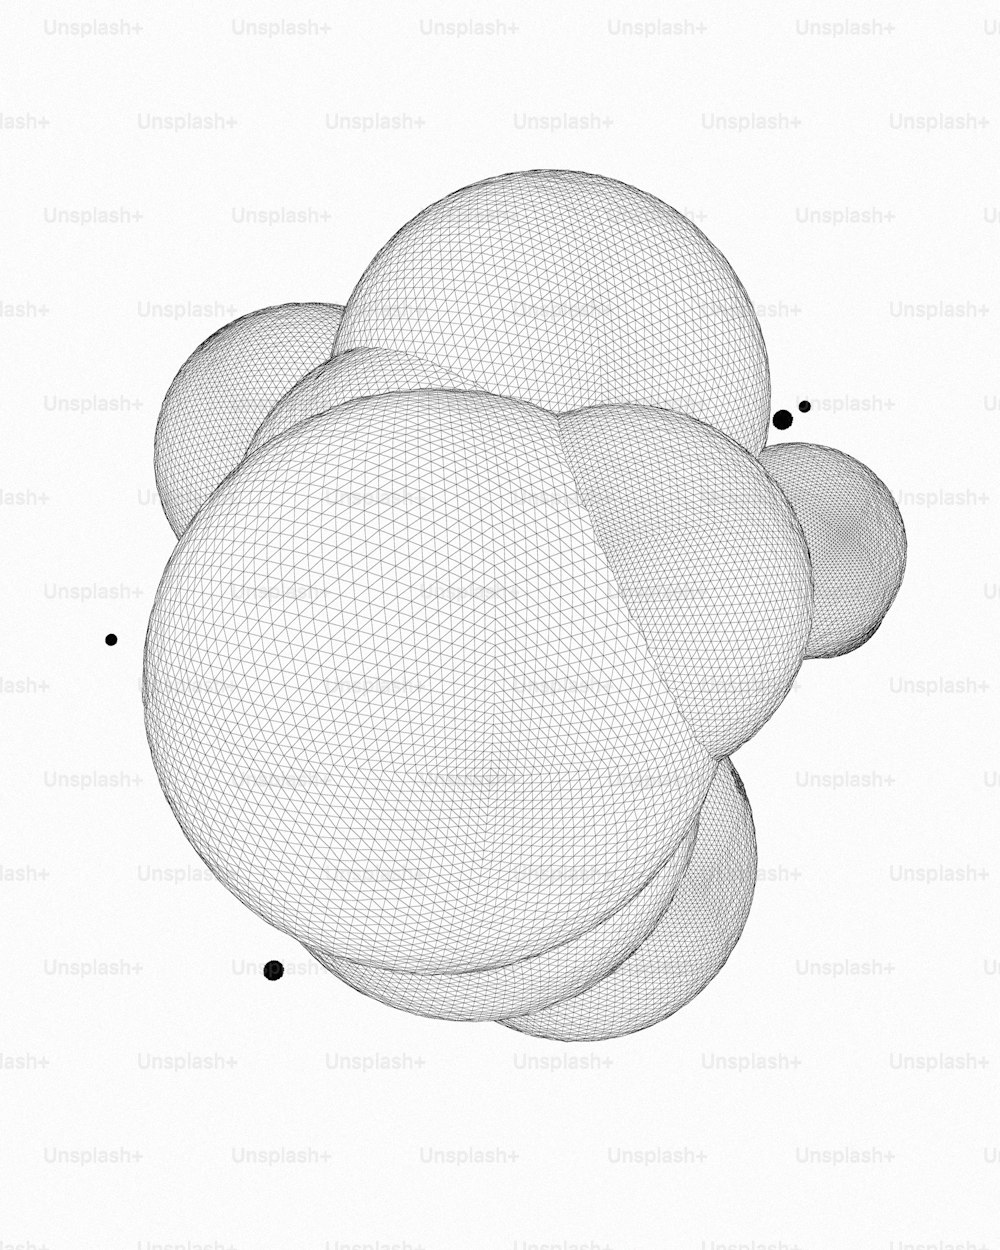 a computer generated image of three spheres